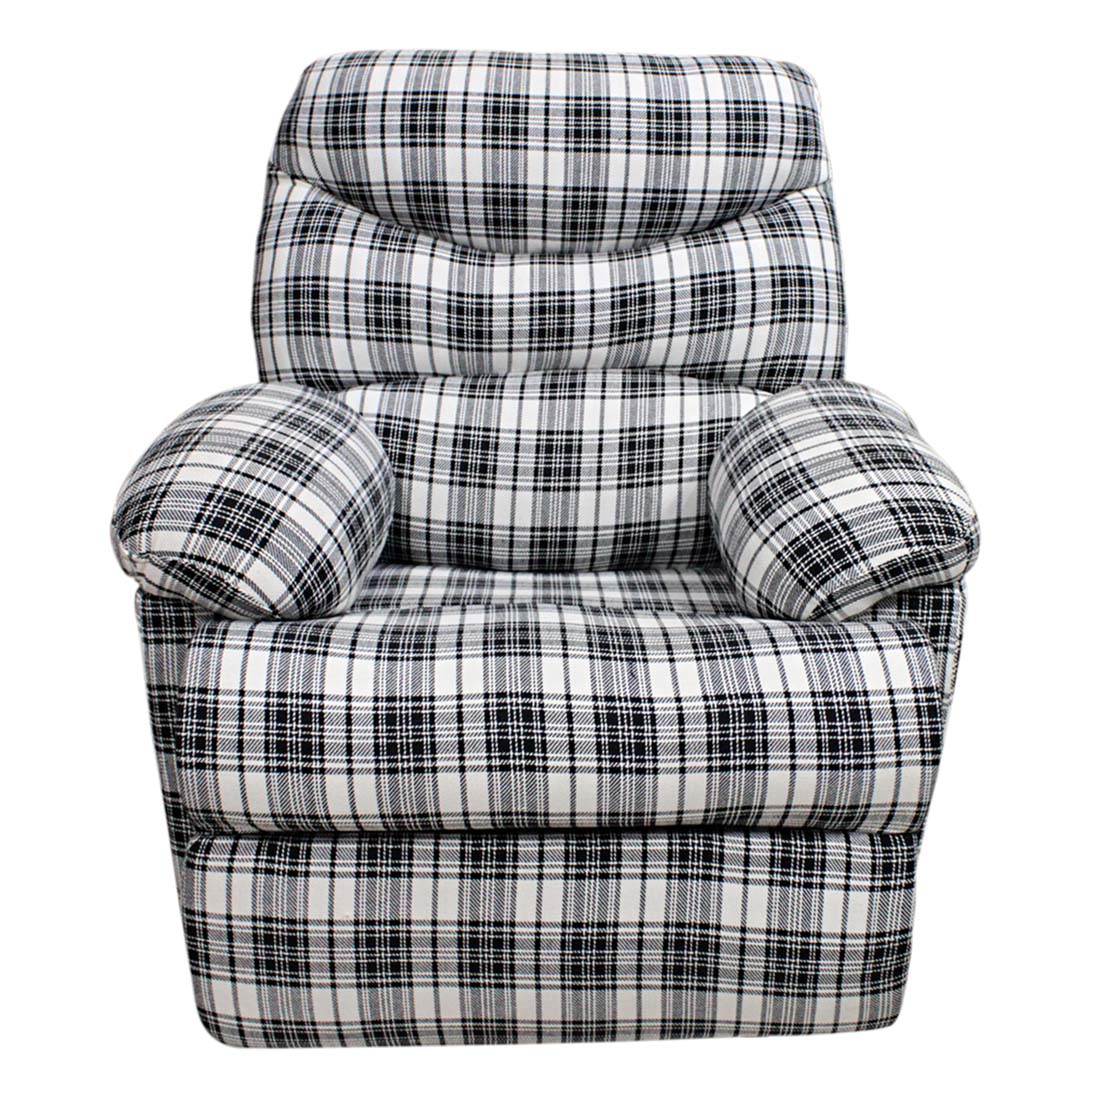 PRIMROSE Christie 2R Rocking Recliner With Cotton Fabric - Black And White